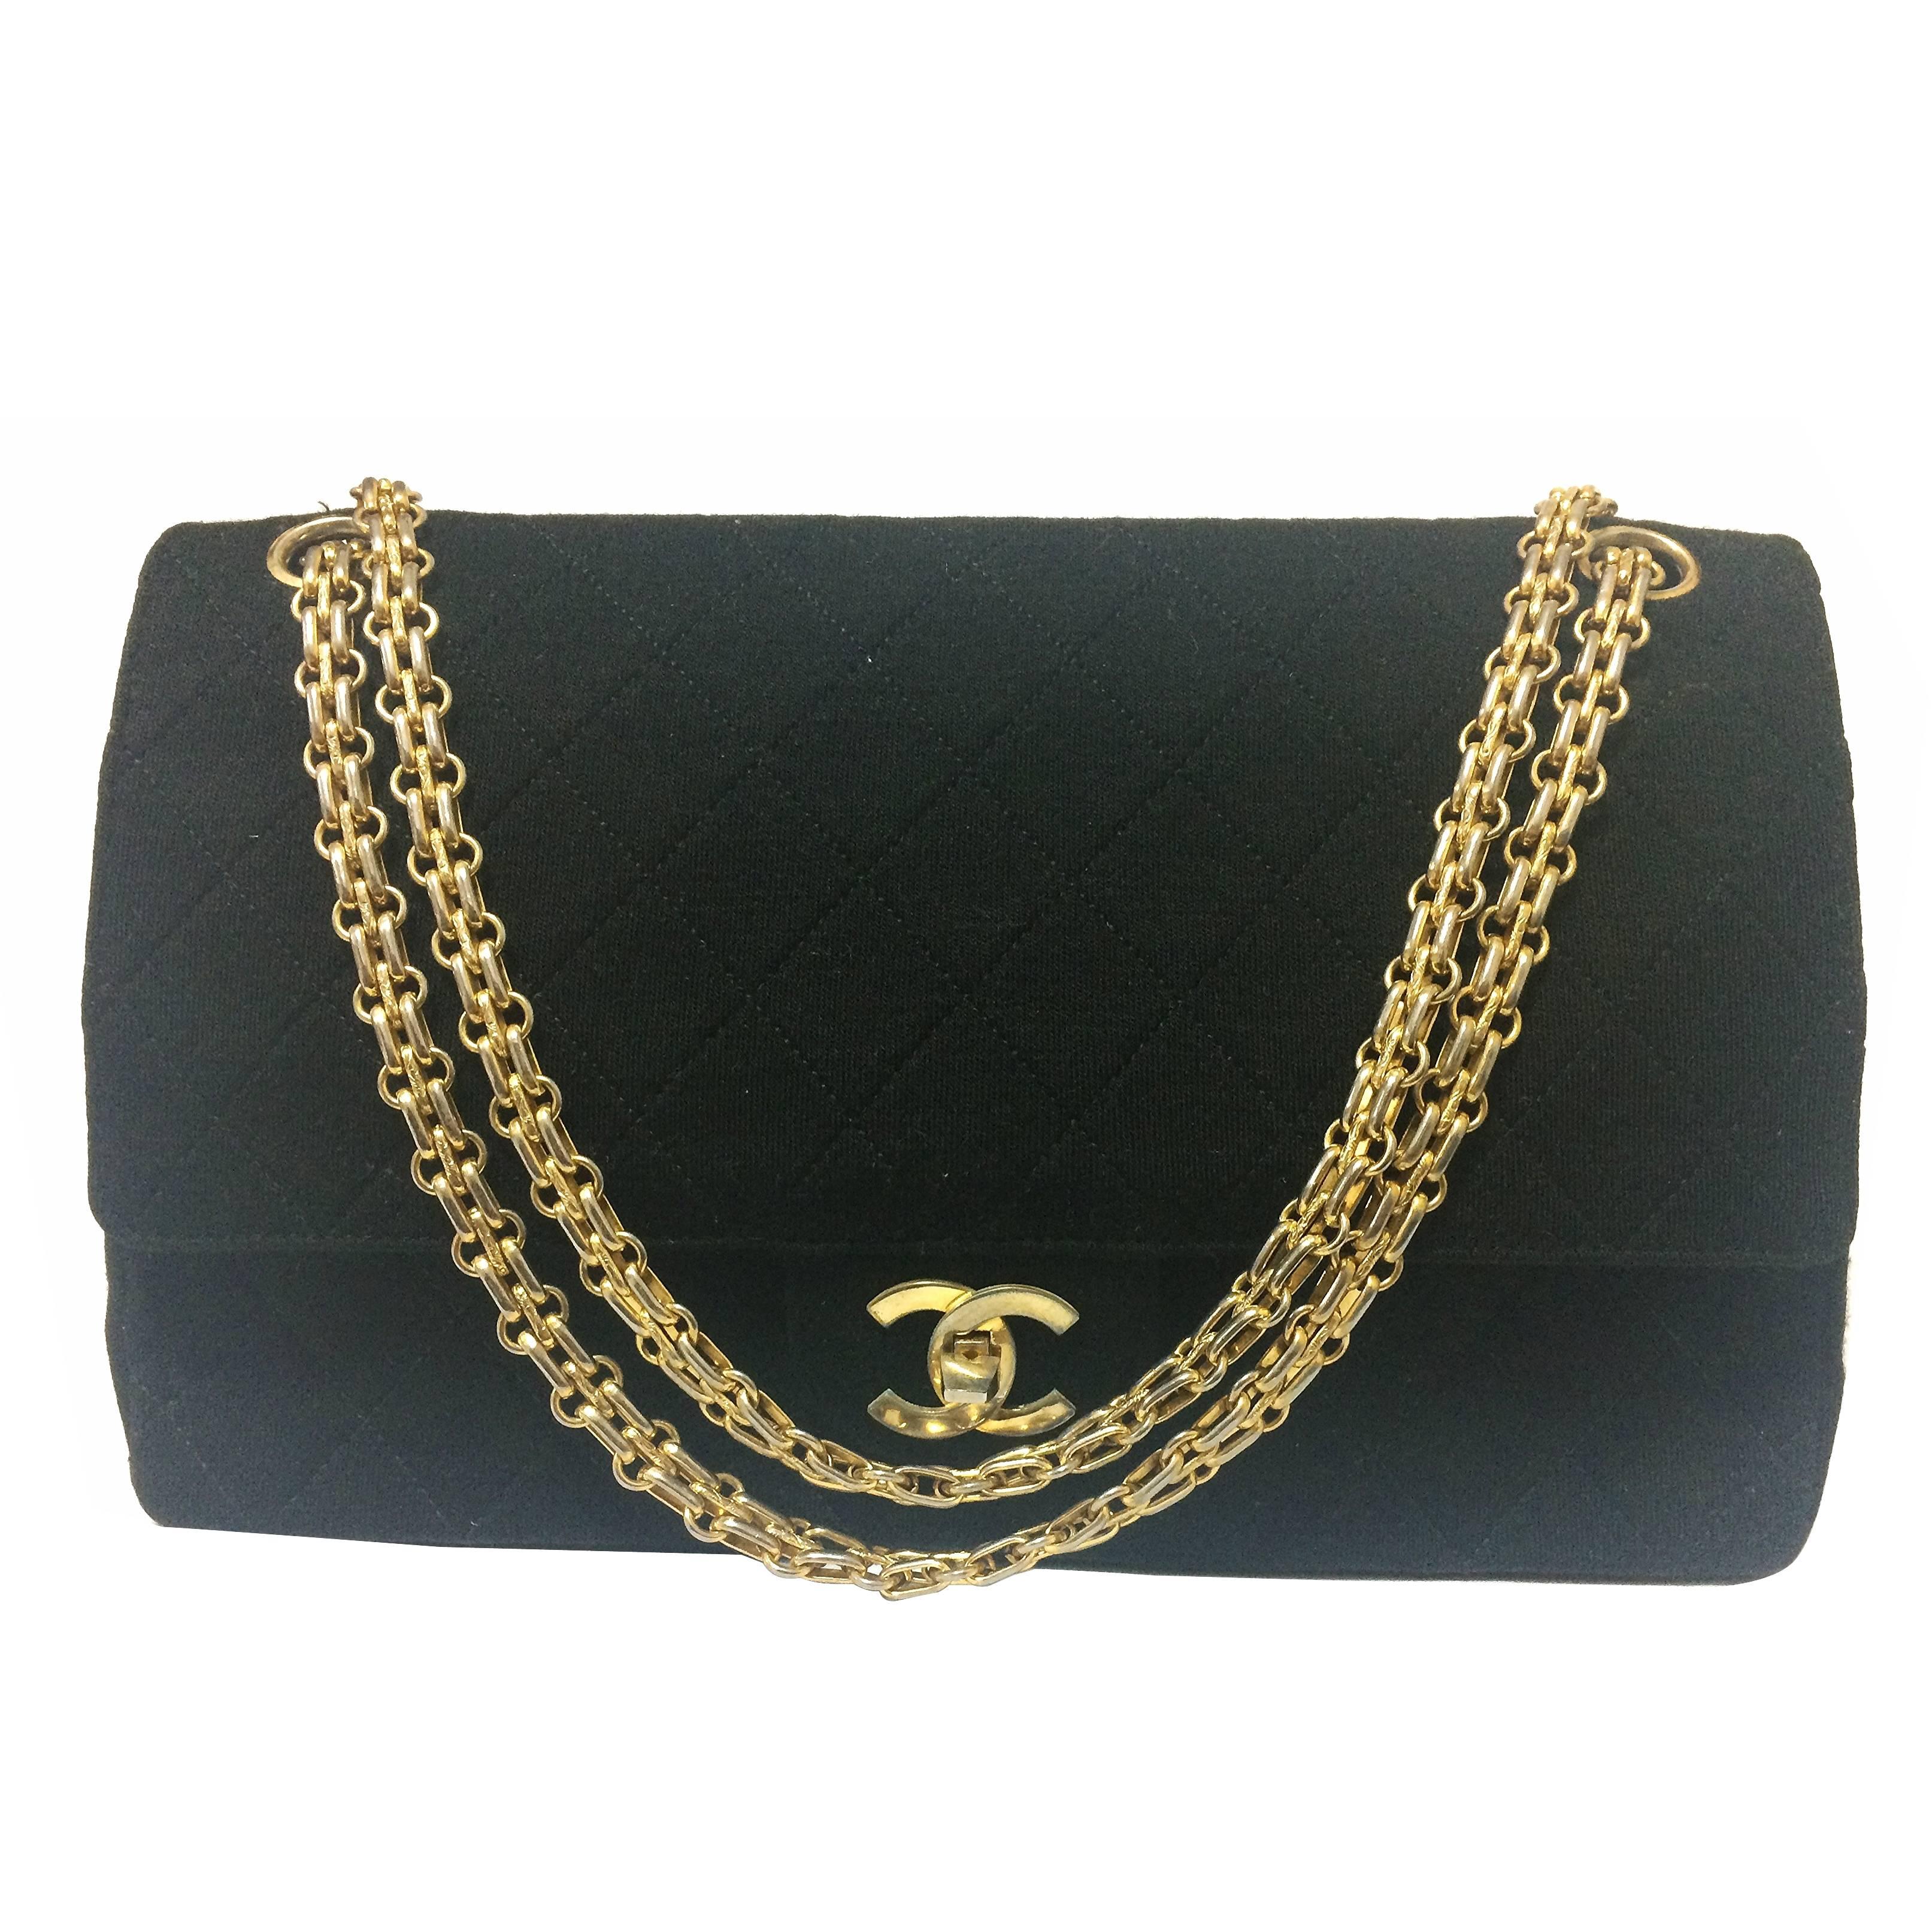 Vintage Chanel classic black jersey 2.55 bag with double flap and skinny chains For Sale